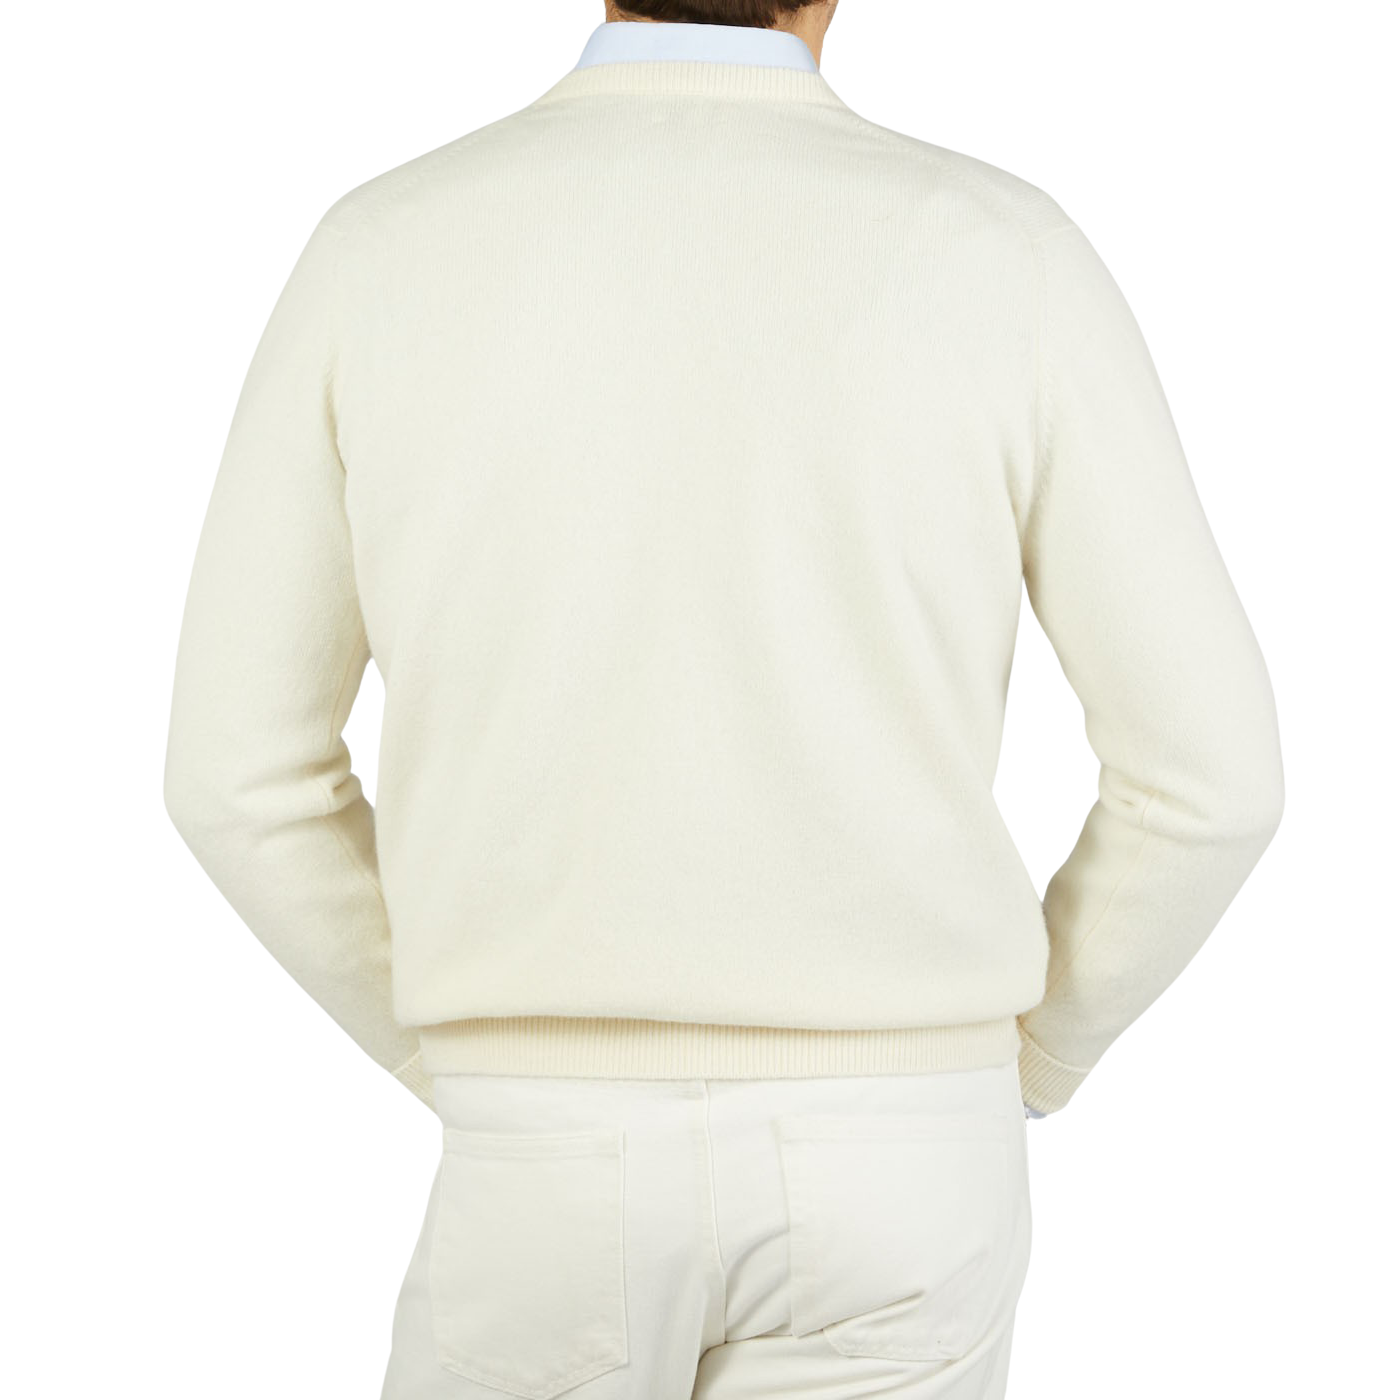 The back view of a man wearing a William Lockie Ecru White Lambswool V-Neck Sweater, creating a smart casual look.